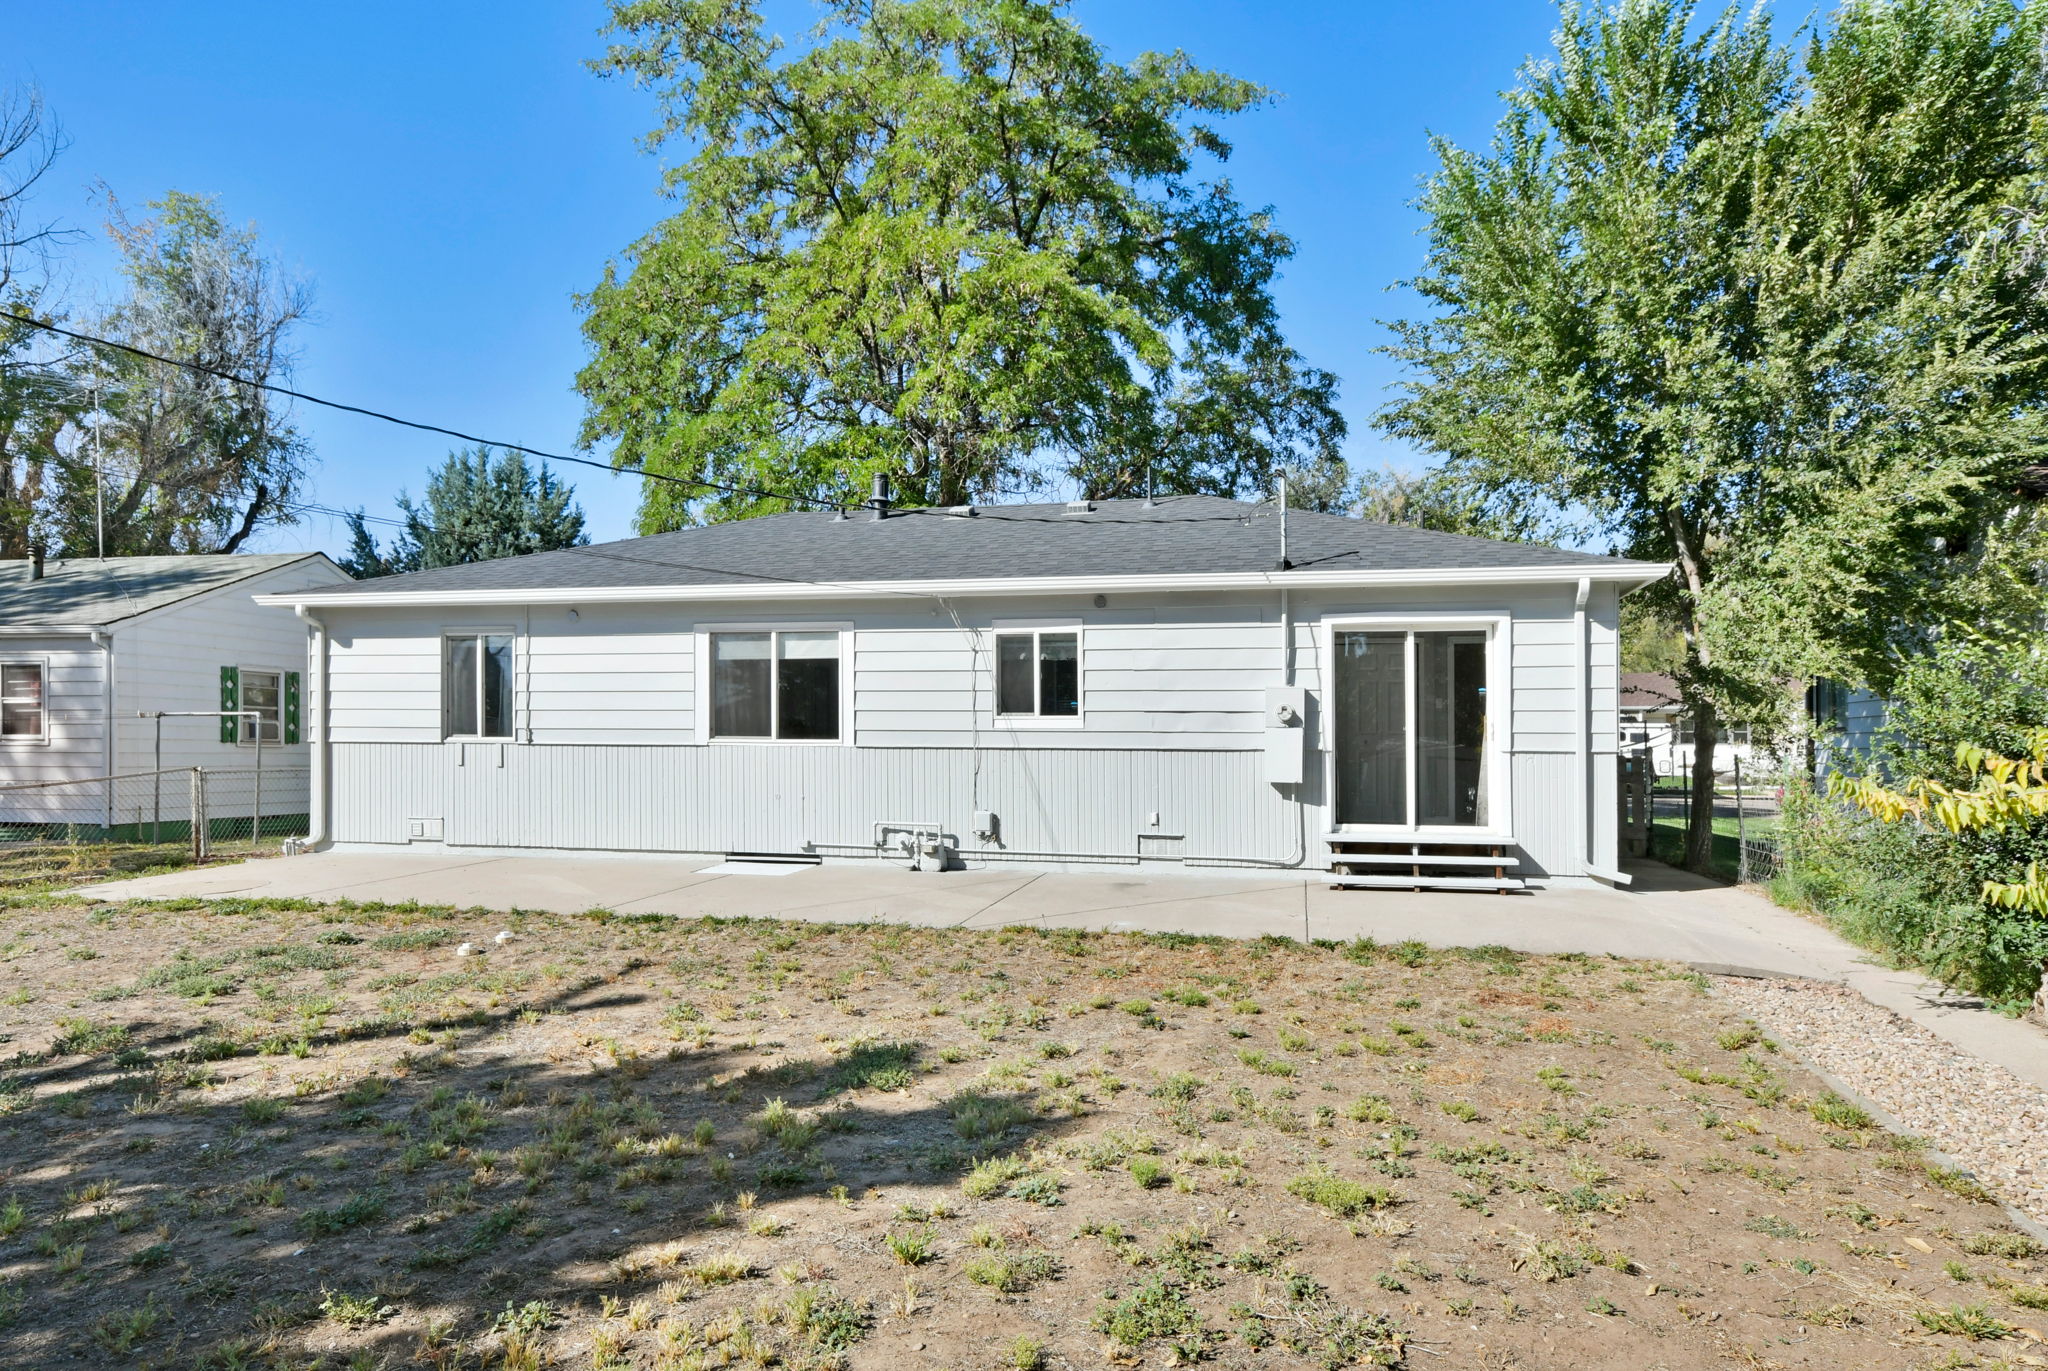  2432 13th Ave, Greeley, CO 80631, US Photo 31